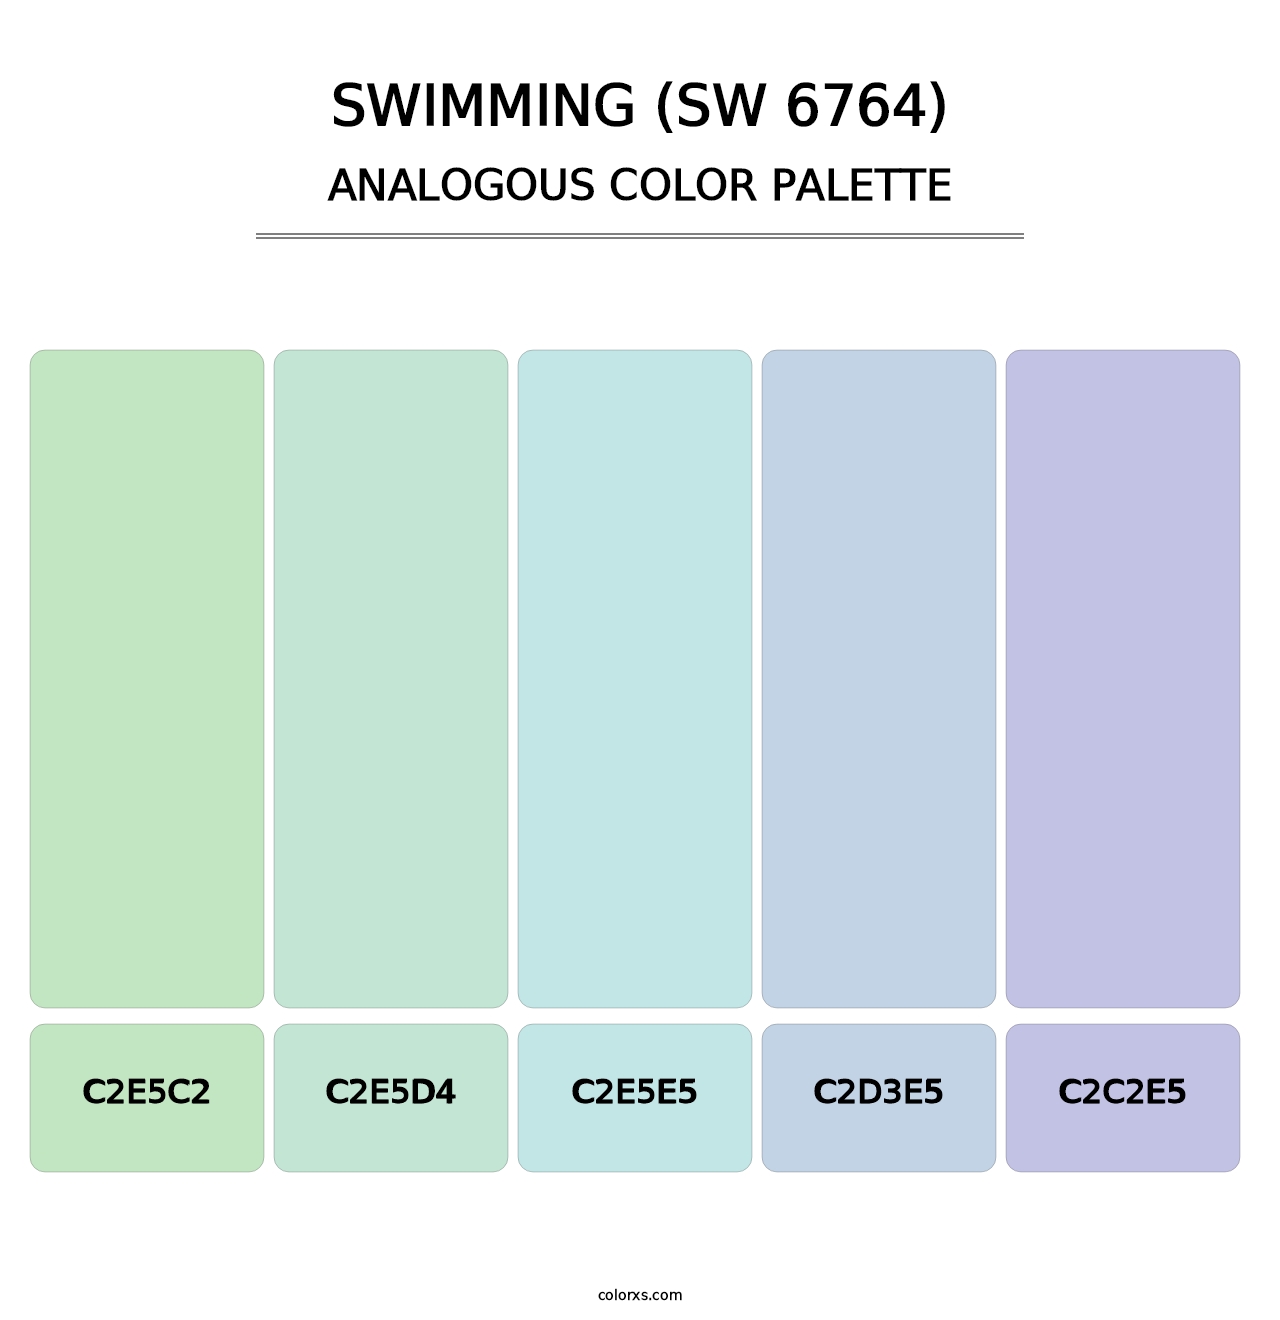 Swimming (SW 6764) - Analogous Color Palette